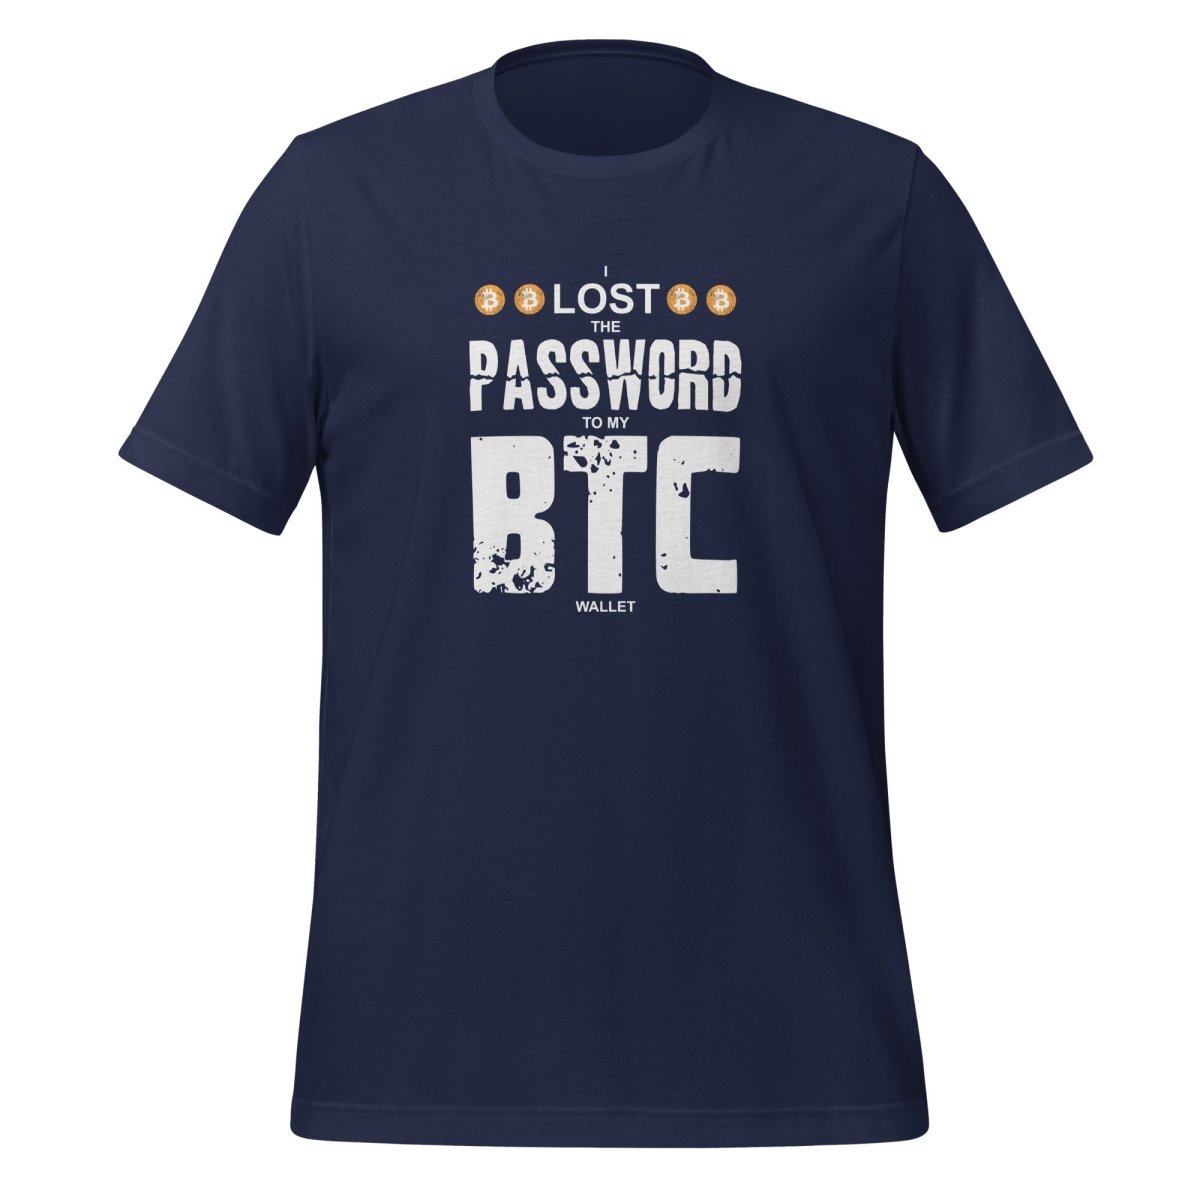 I Lost the Password to my Bitcoin Wallet T - Shirt (unisex) - Navy - AI Store